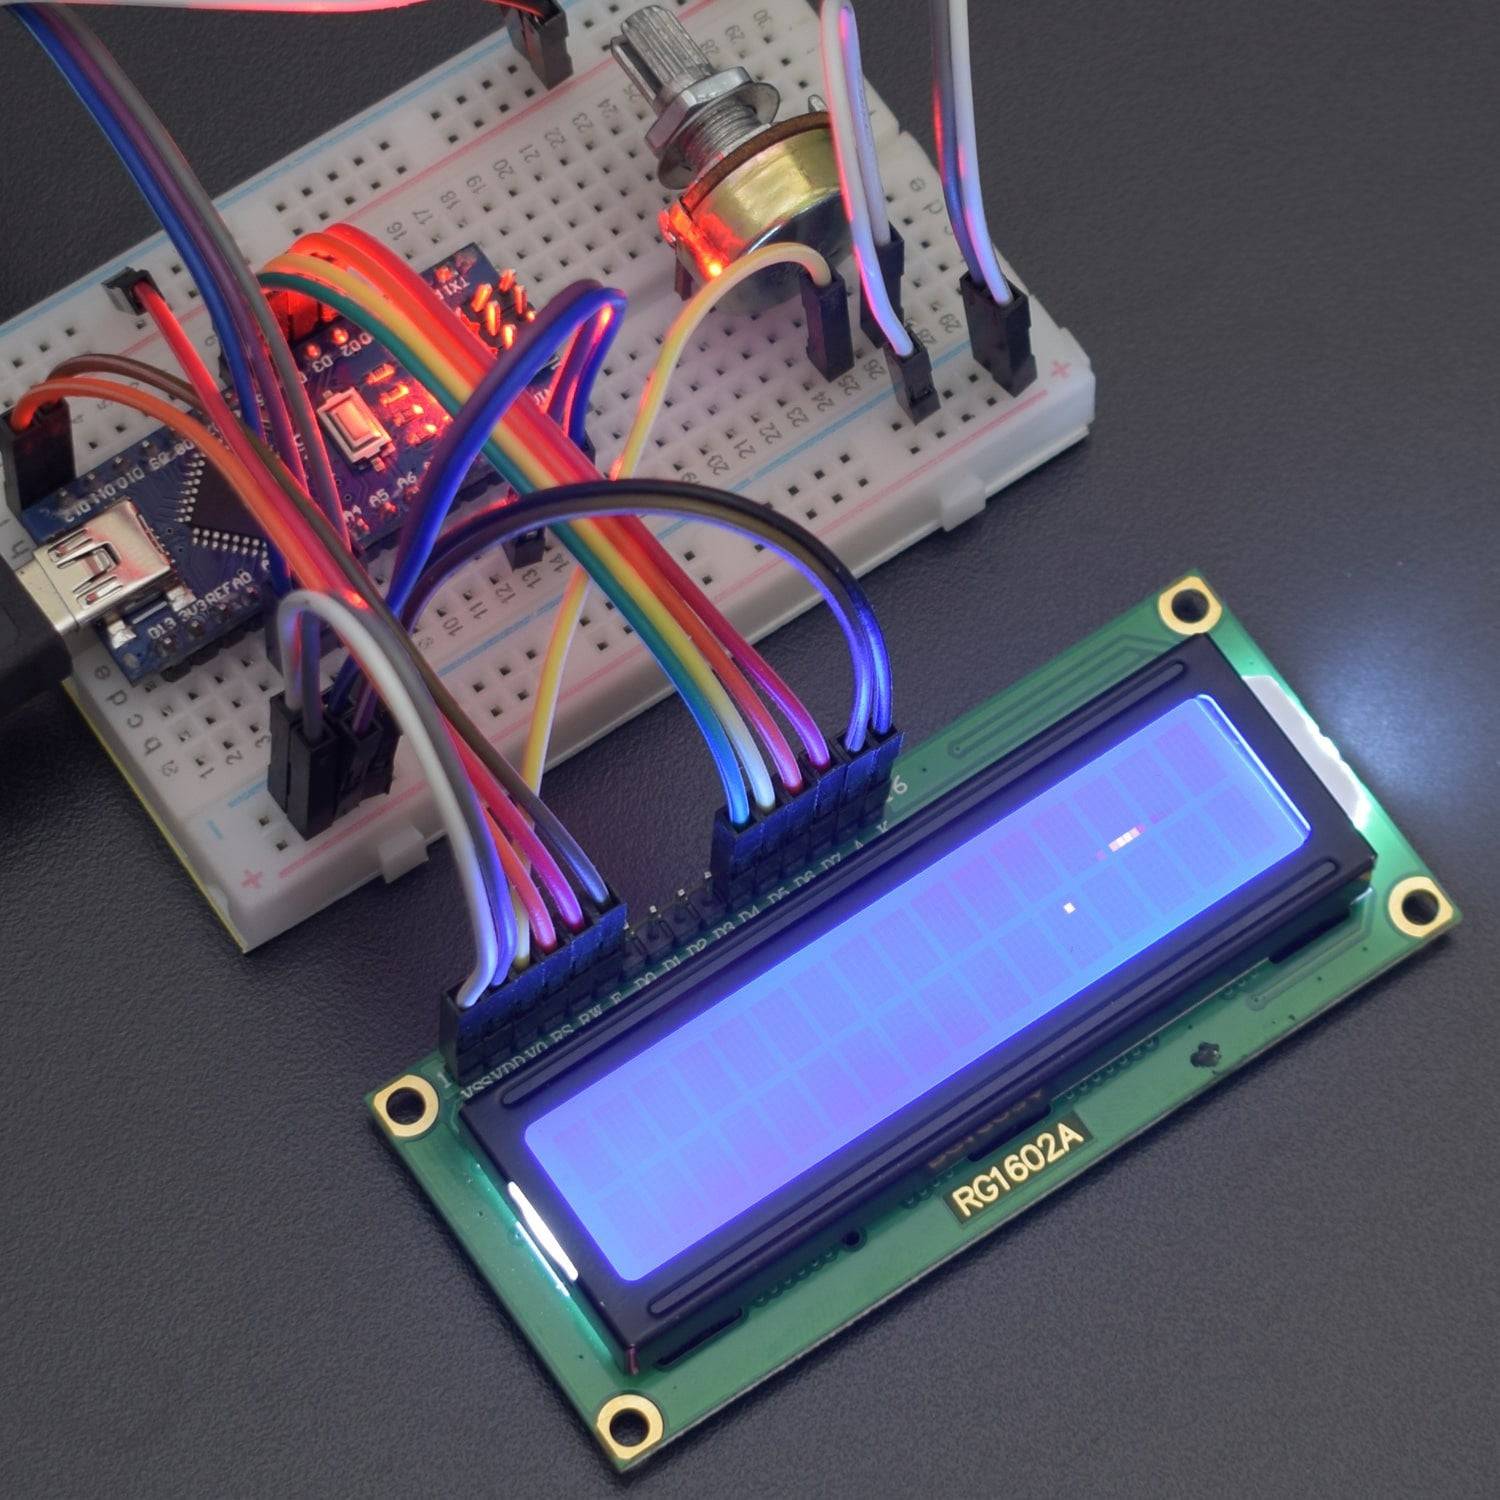 Make a Snake Maze game using 16*2 LCD and Joystick Module interfacing with Arduino Nano - KT877 - REES52